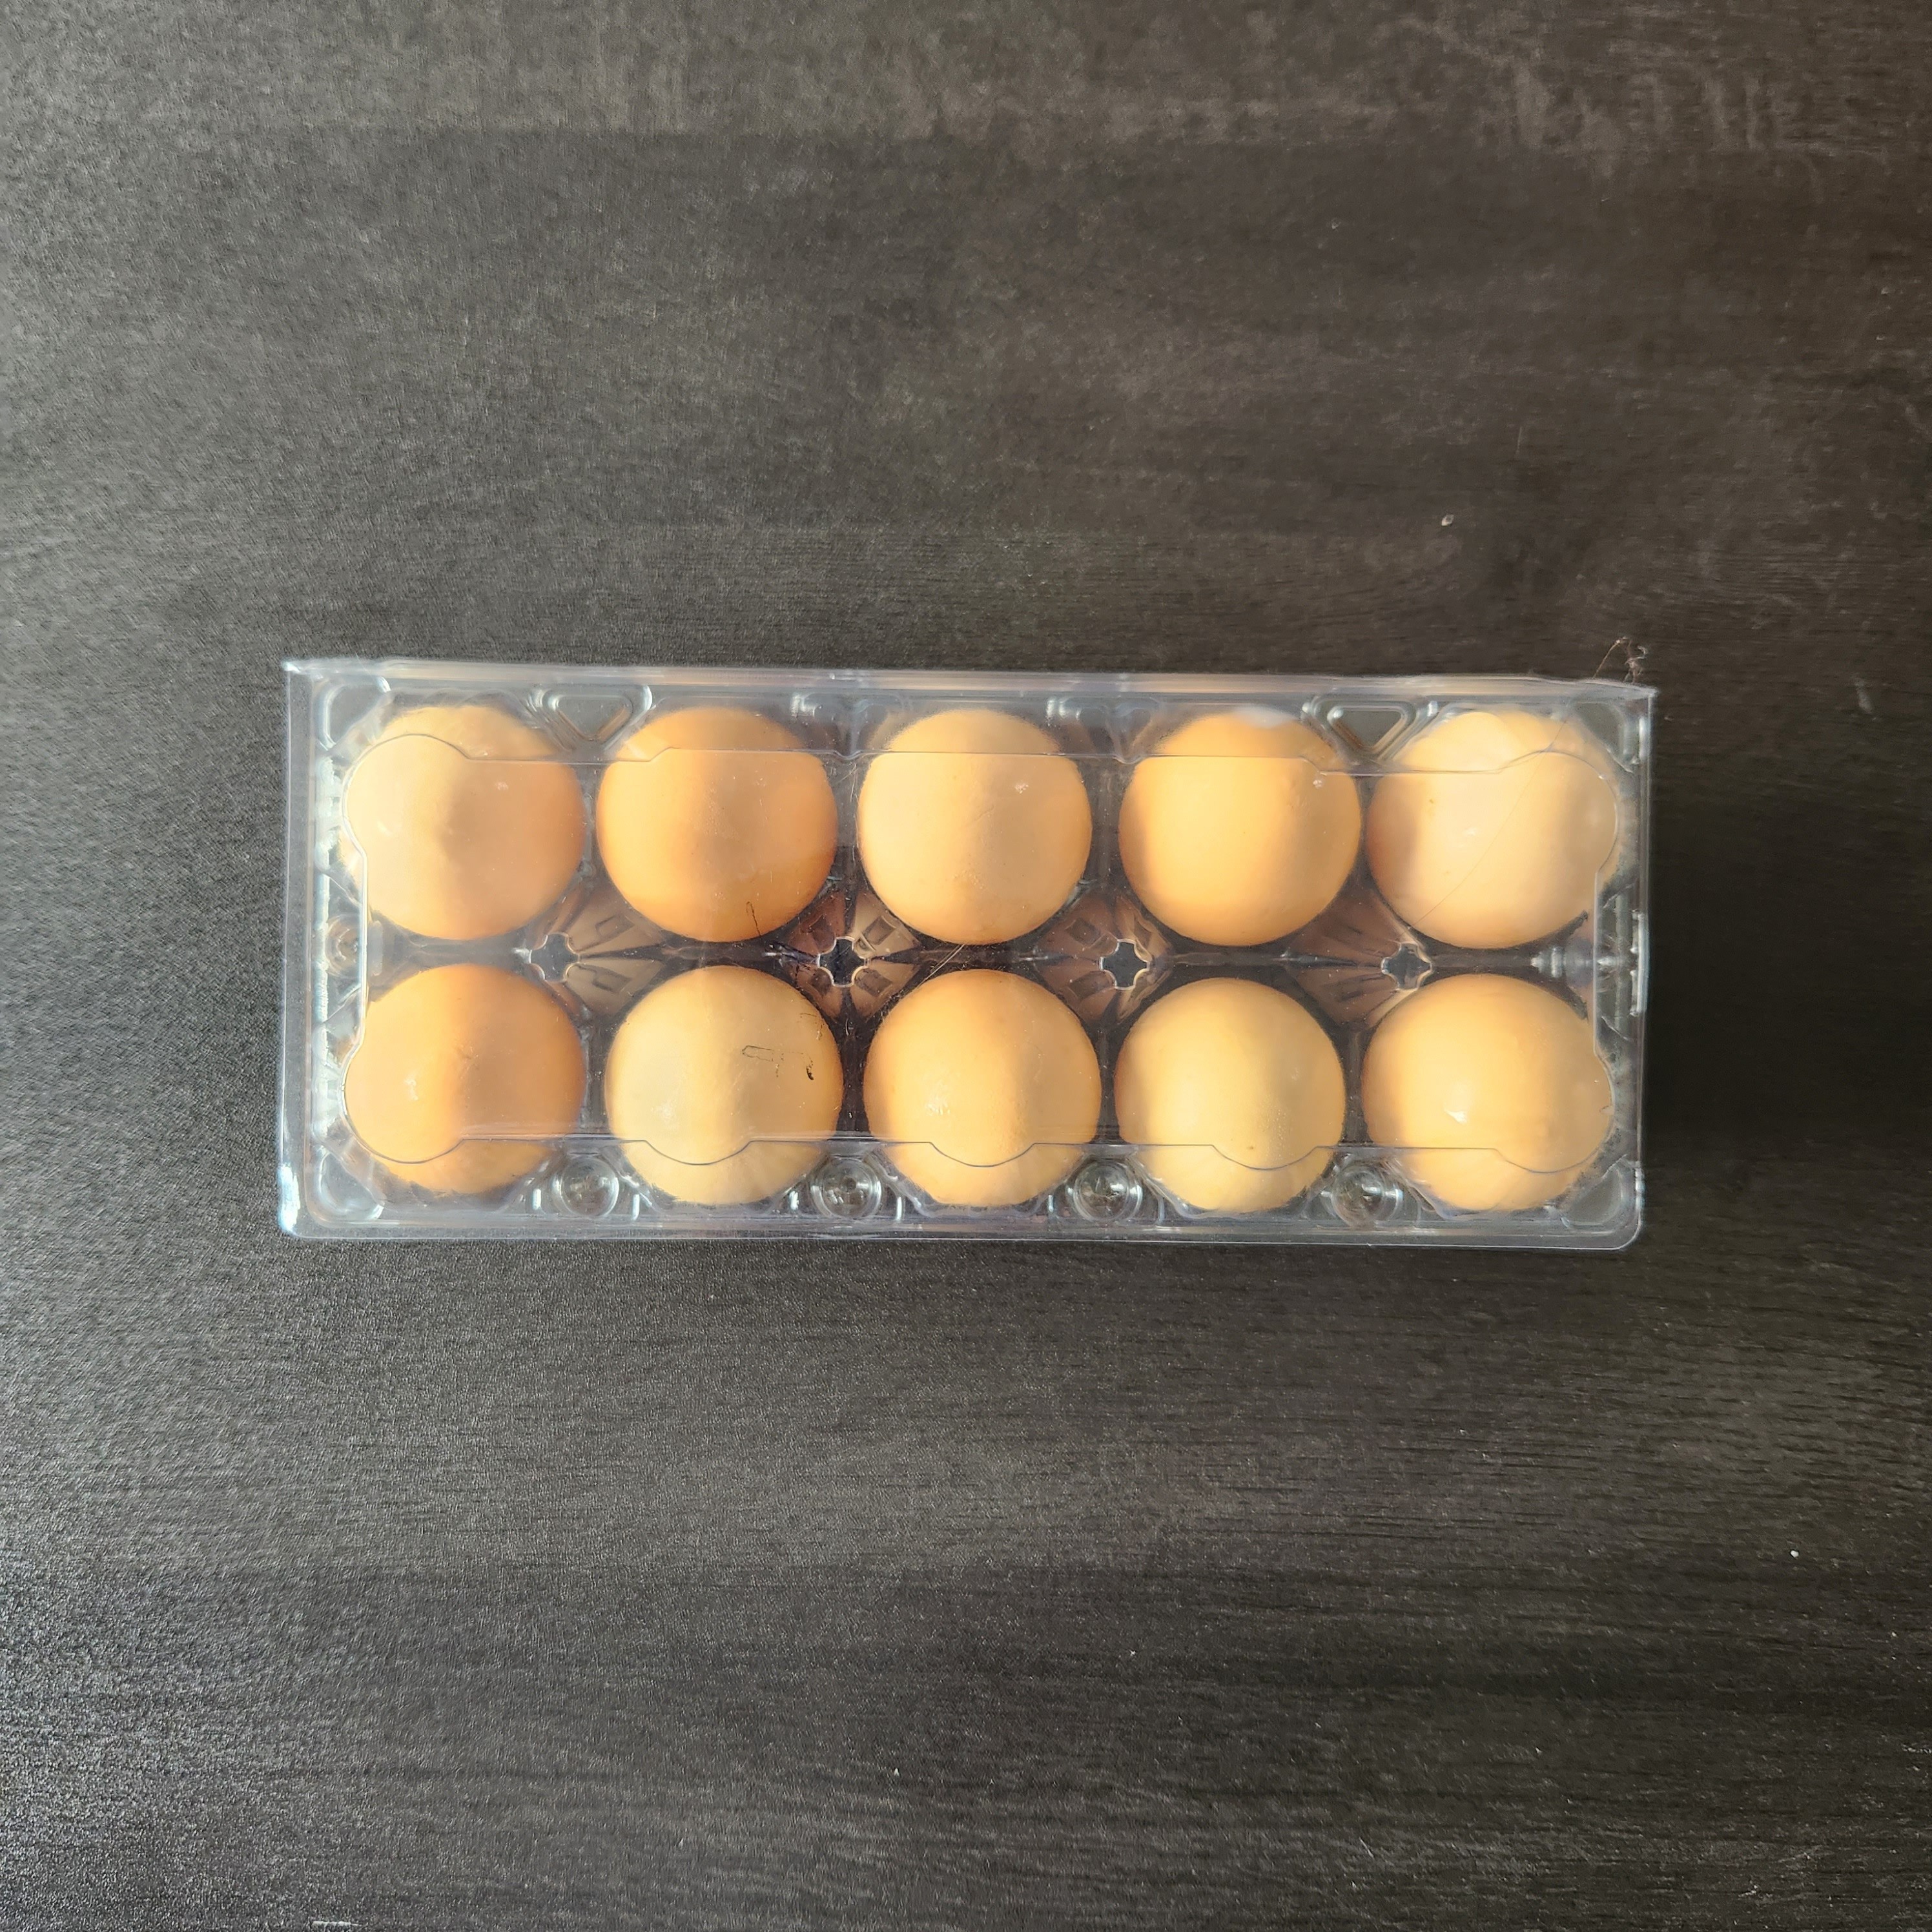 20 PCS 12 Count Egg Cartons Cheap Bulk Empty Cardboard Egg Cartons White  Pulp Paper Egg Cartons for Chicken Egg, Fresh Egg and Sale, with Stickers